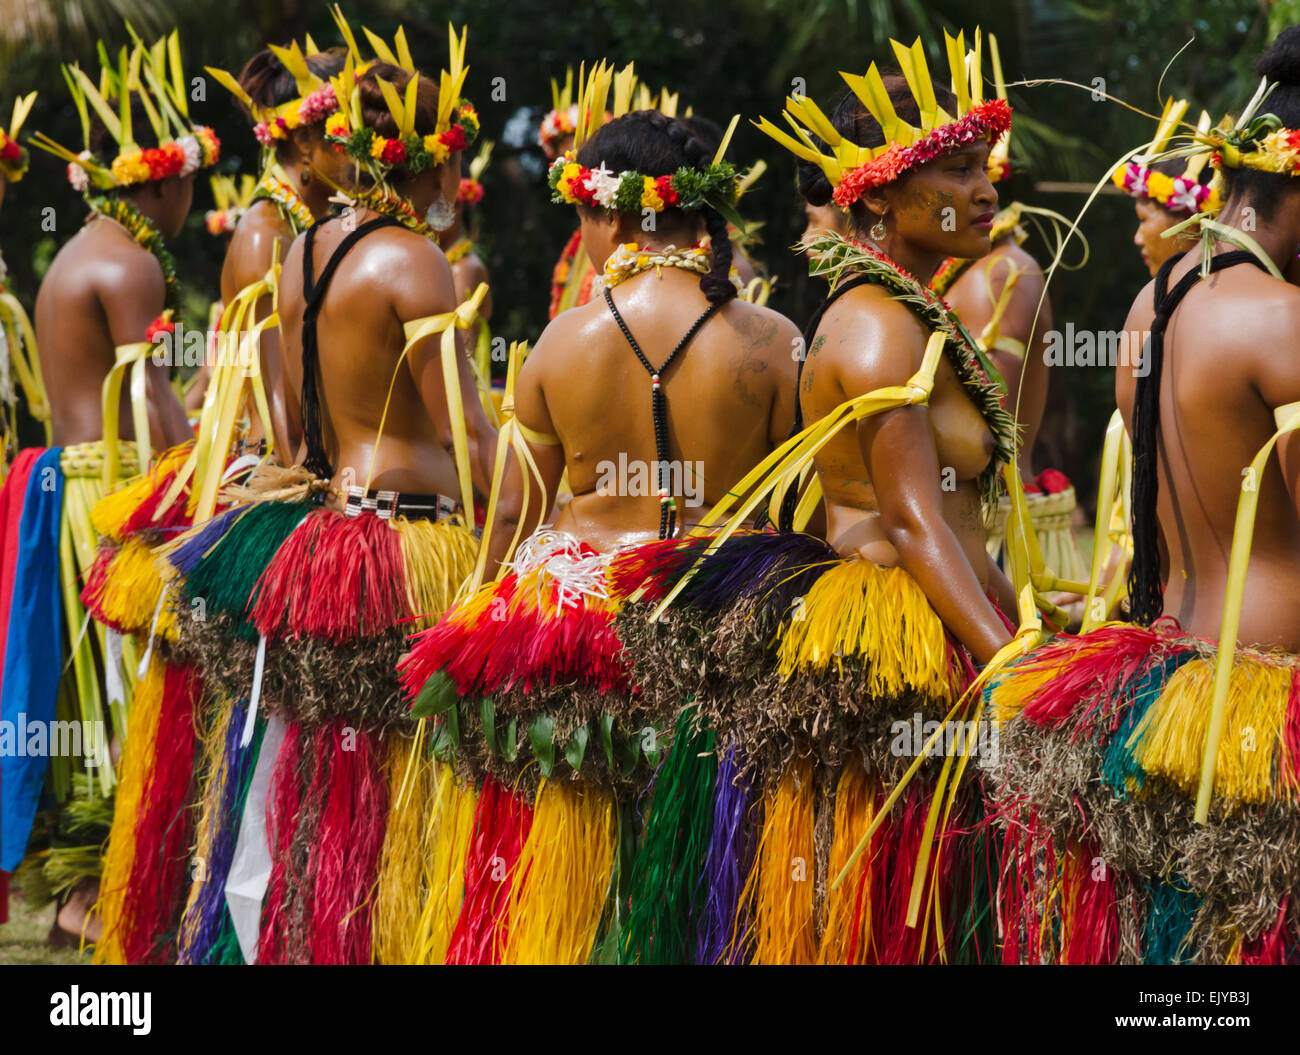 Yapese girls wearing different styles of grass skirts at Yap Day Festival,  Yap Island, Federated States of Micronesia Stock Photo - Alamy